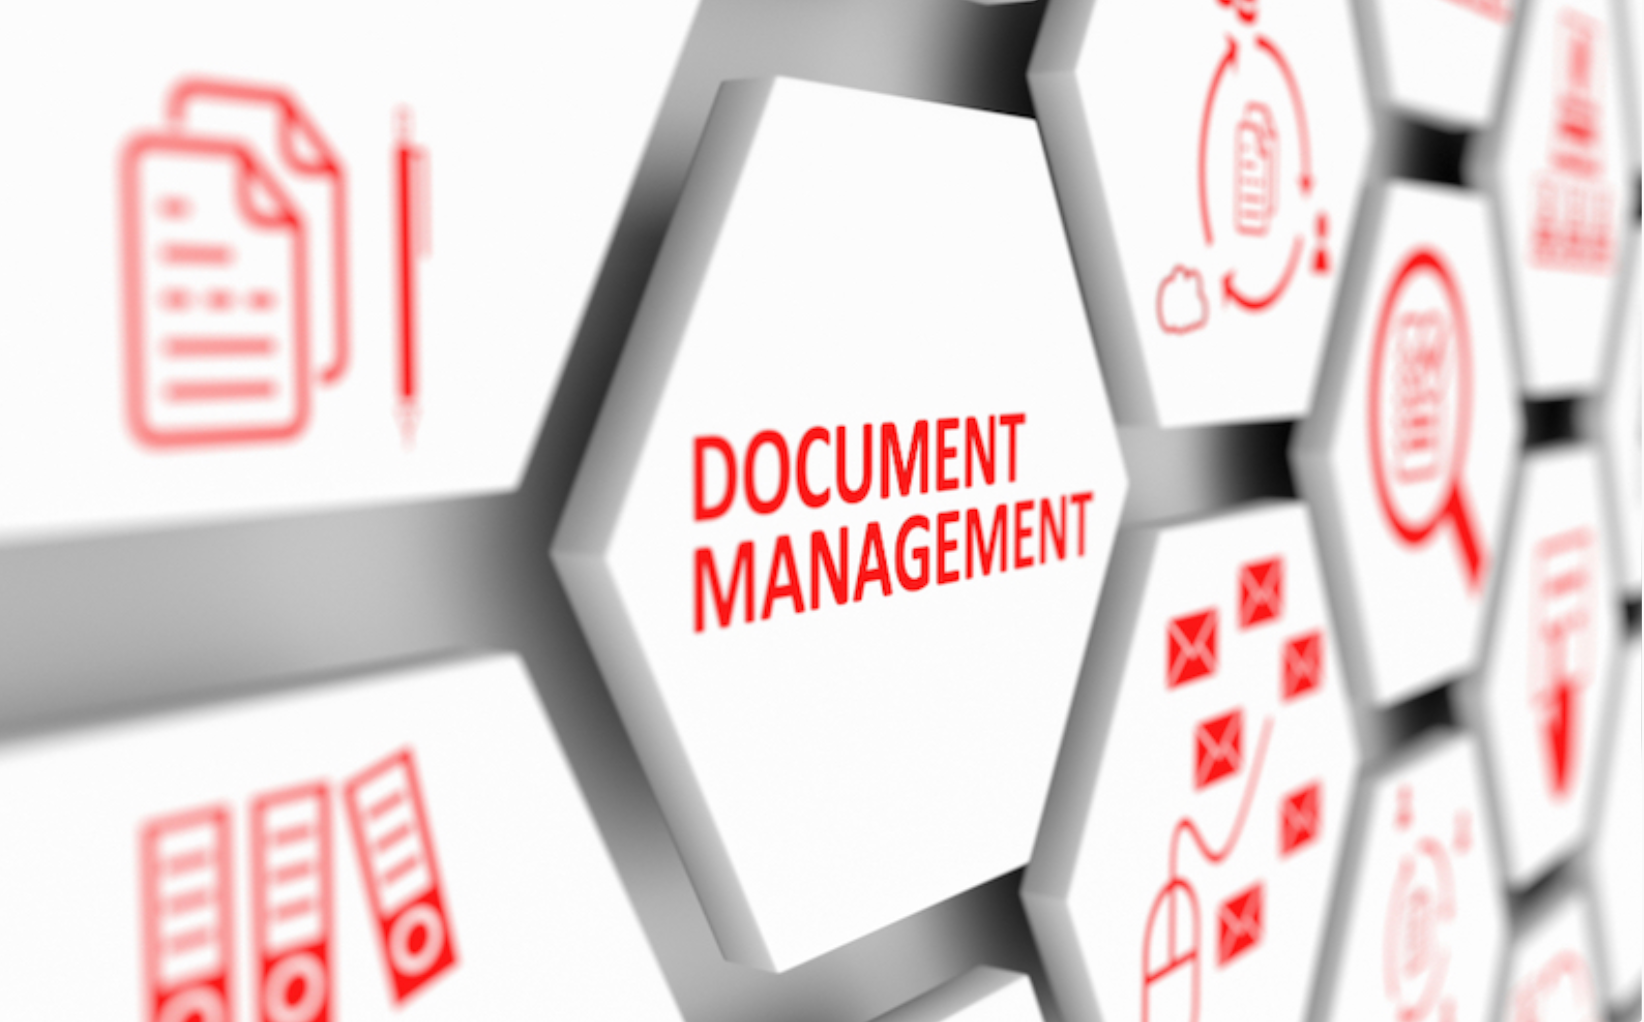 How Document Management Can Help Your Business